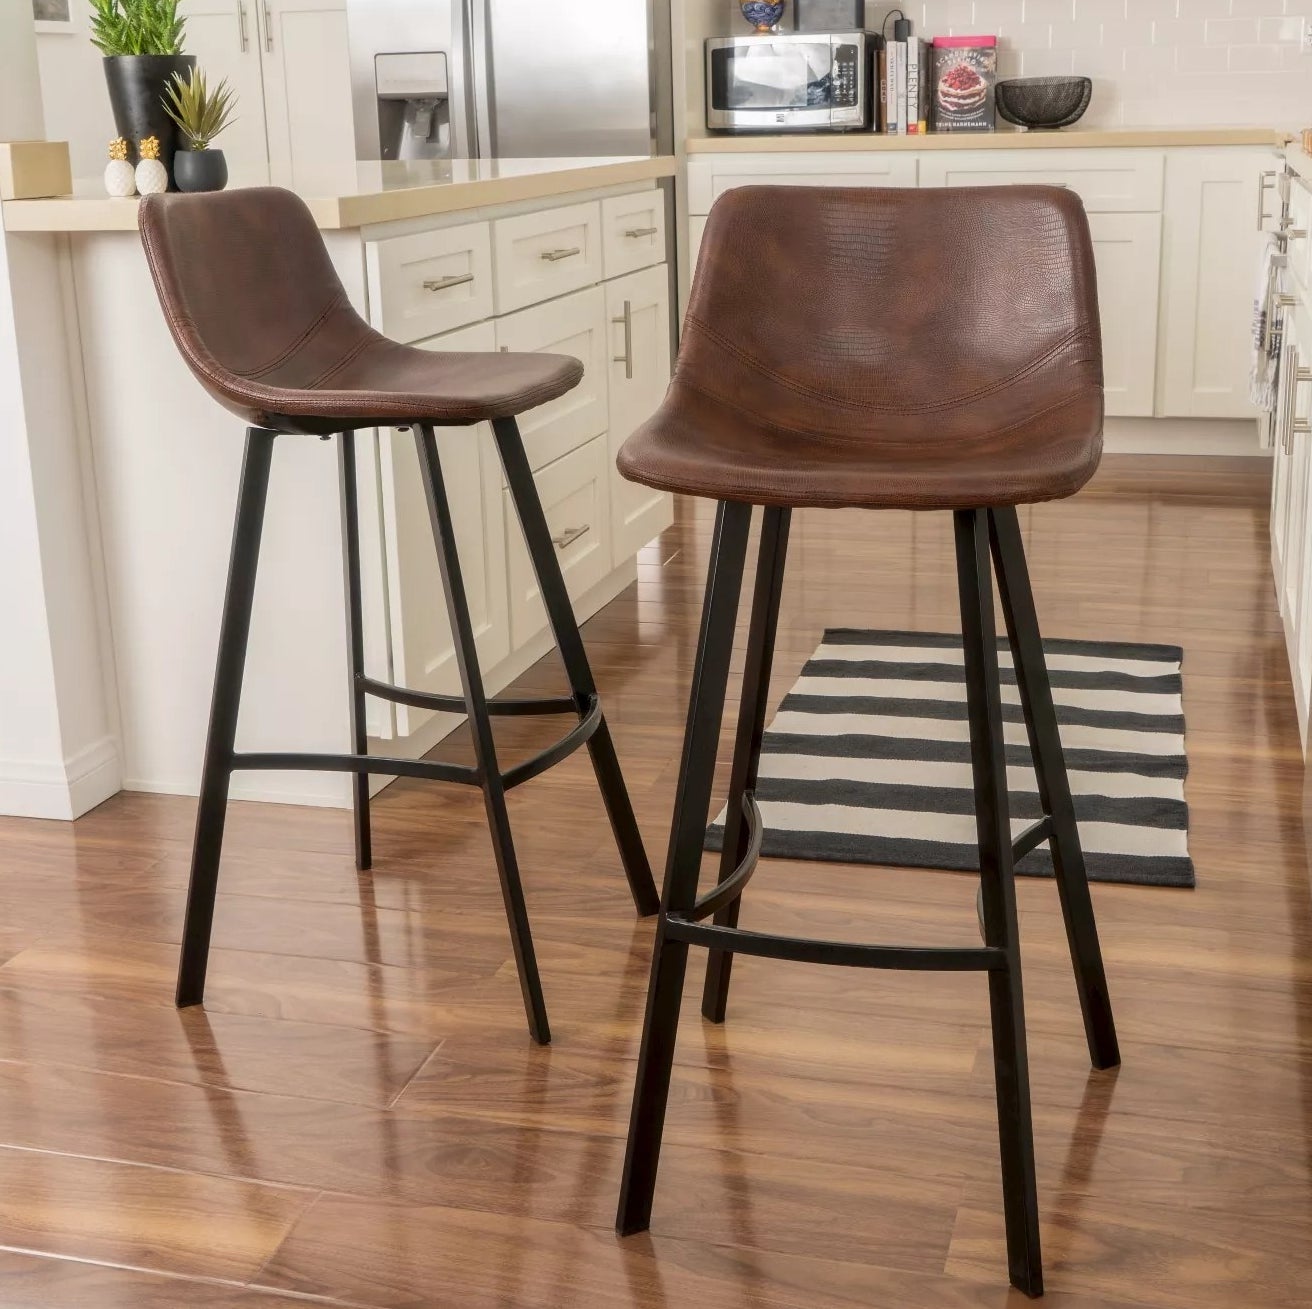 The brown and black barstools